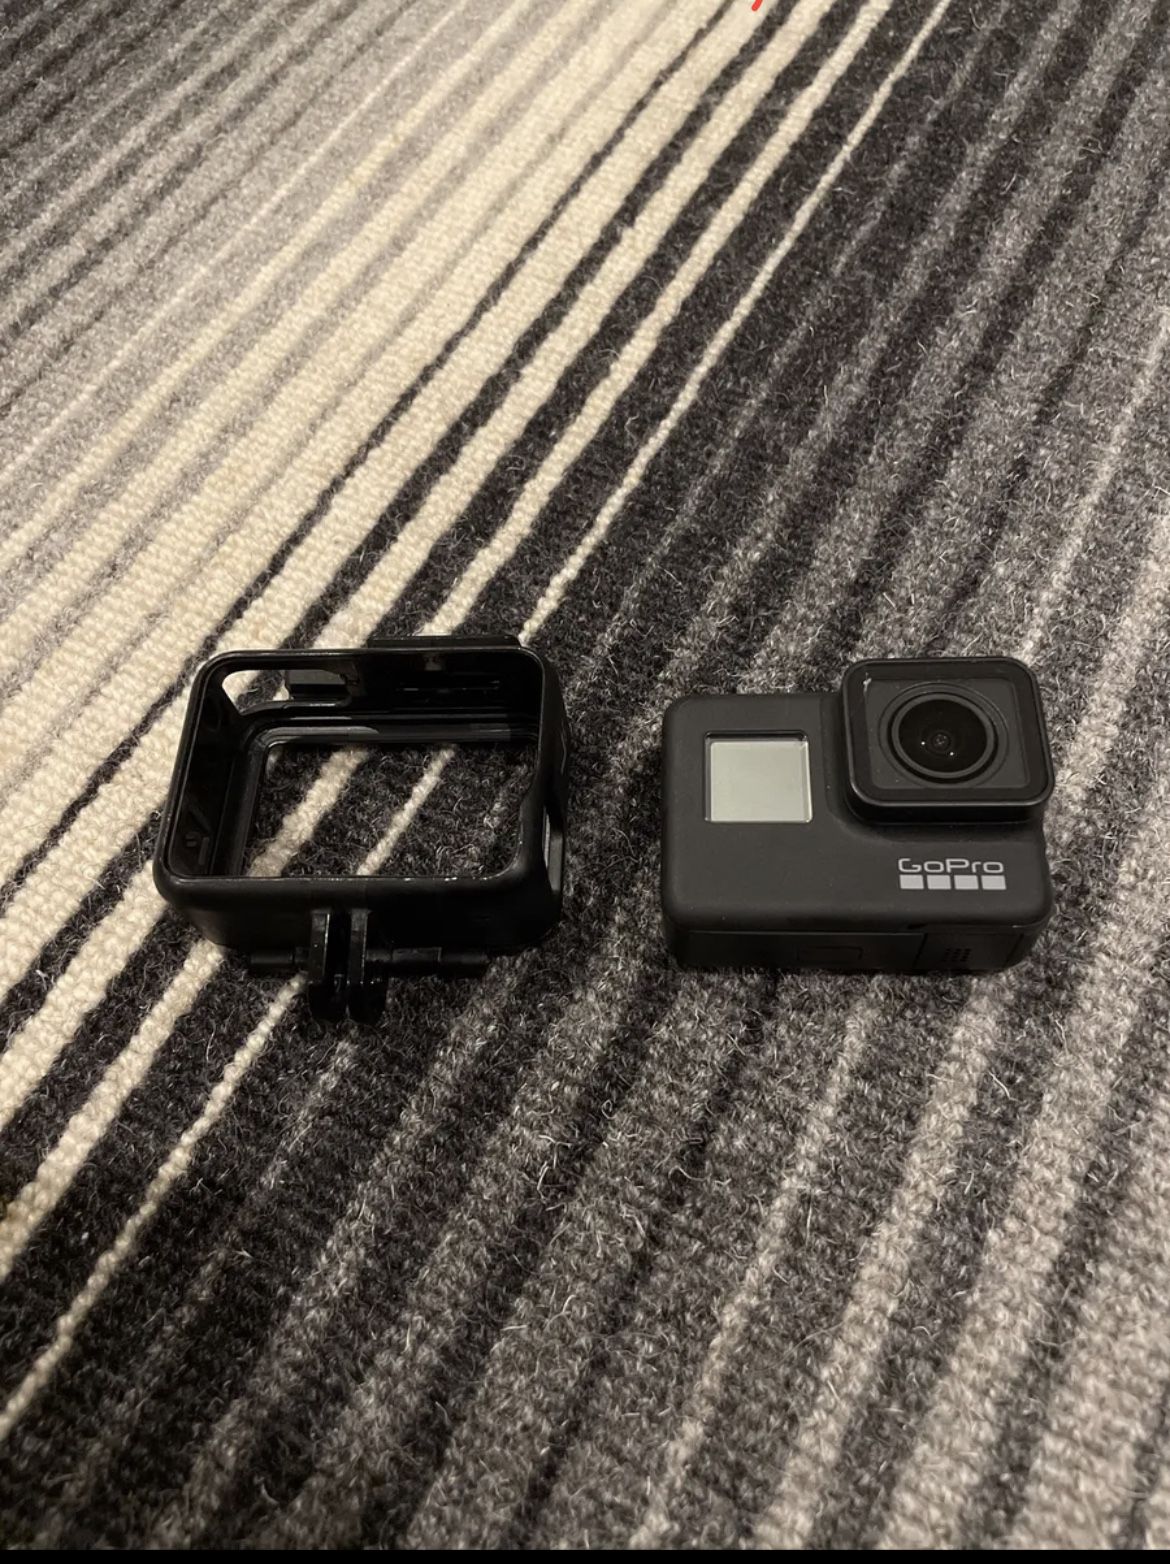 GoPro HERO7 Action Camera - Black - PRODUCT INCLUDES CAMERA, BATTERY, AND A CASE